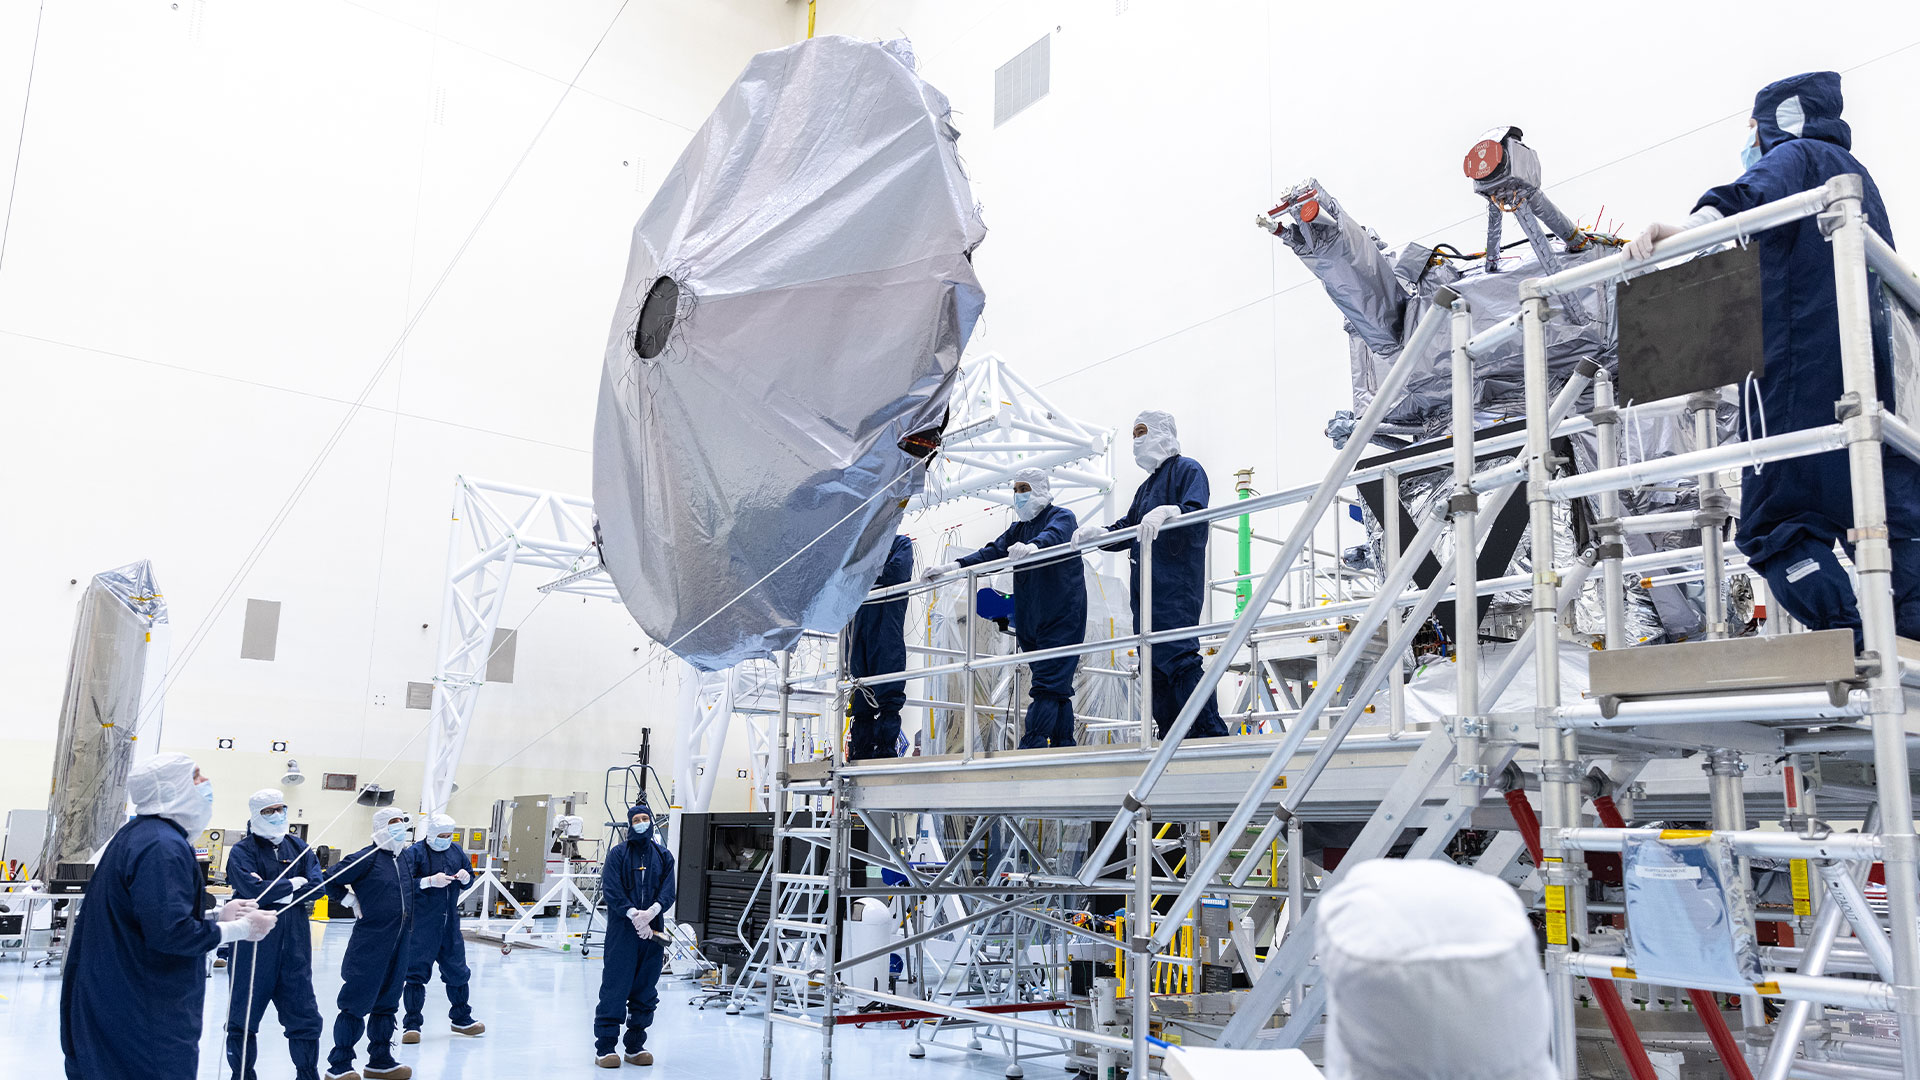 Workers in blue protective clothing and white head coverings hold cables to position Europa Clipper's high gain antenna for installation on the spacecraft. Some workers are on the ground, and some are up on a platform.